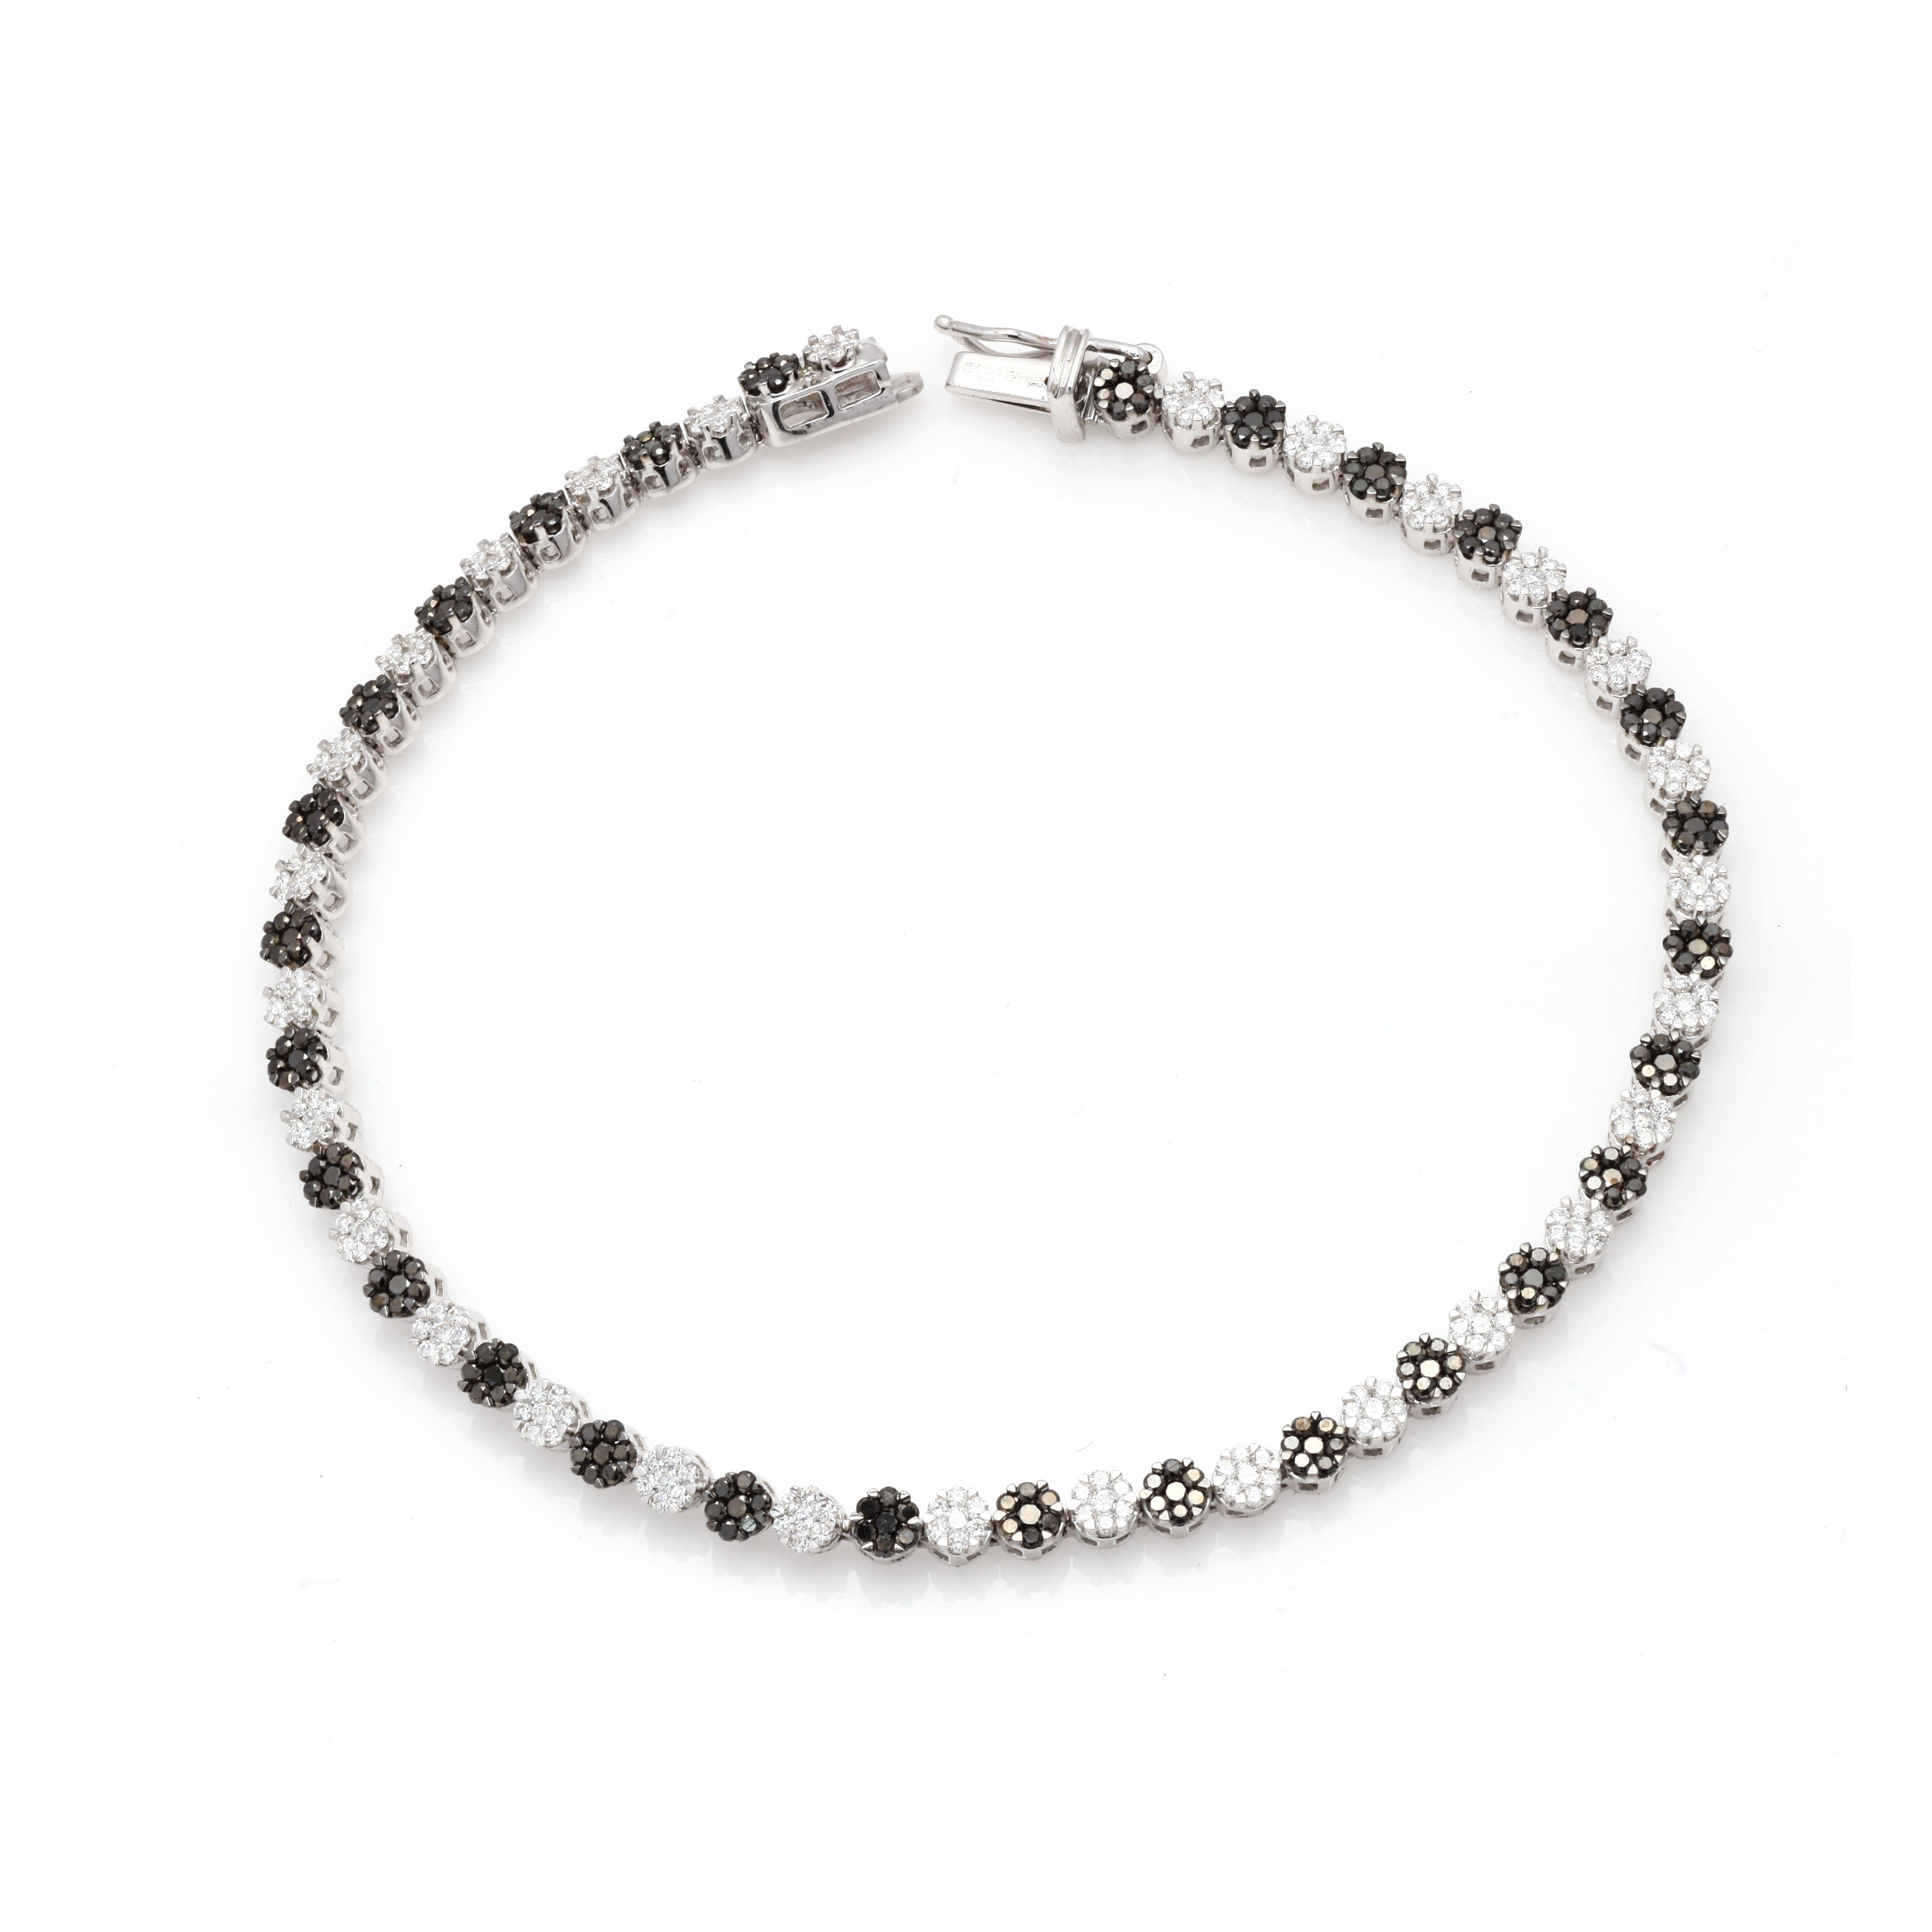 Brilliant 2.16 ct Black White Diamond Tennis Bracelet in 18K gold. It has a perfect round cut diamonds to make you stand out on any occasion or an event. 
April birthstone diamond brings love, fame, success and prosperity.
Featuring 2.16 cts of